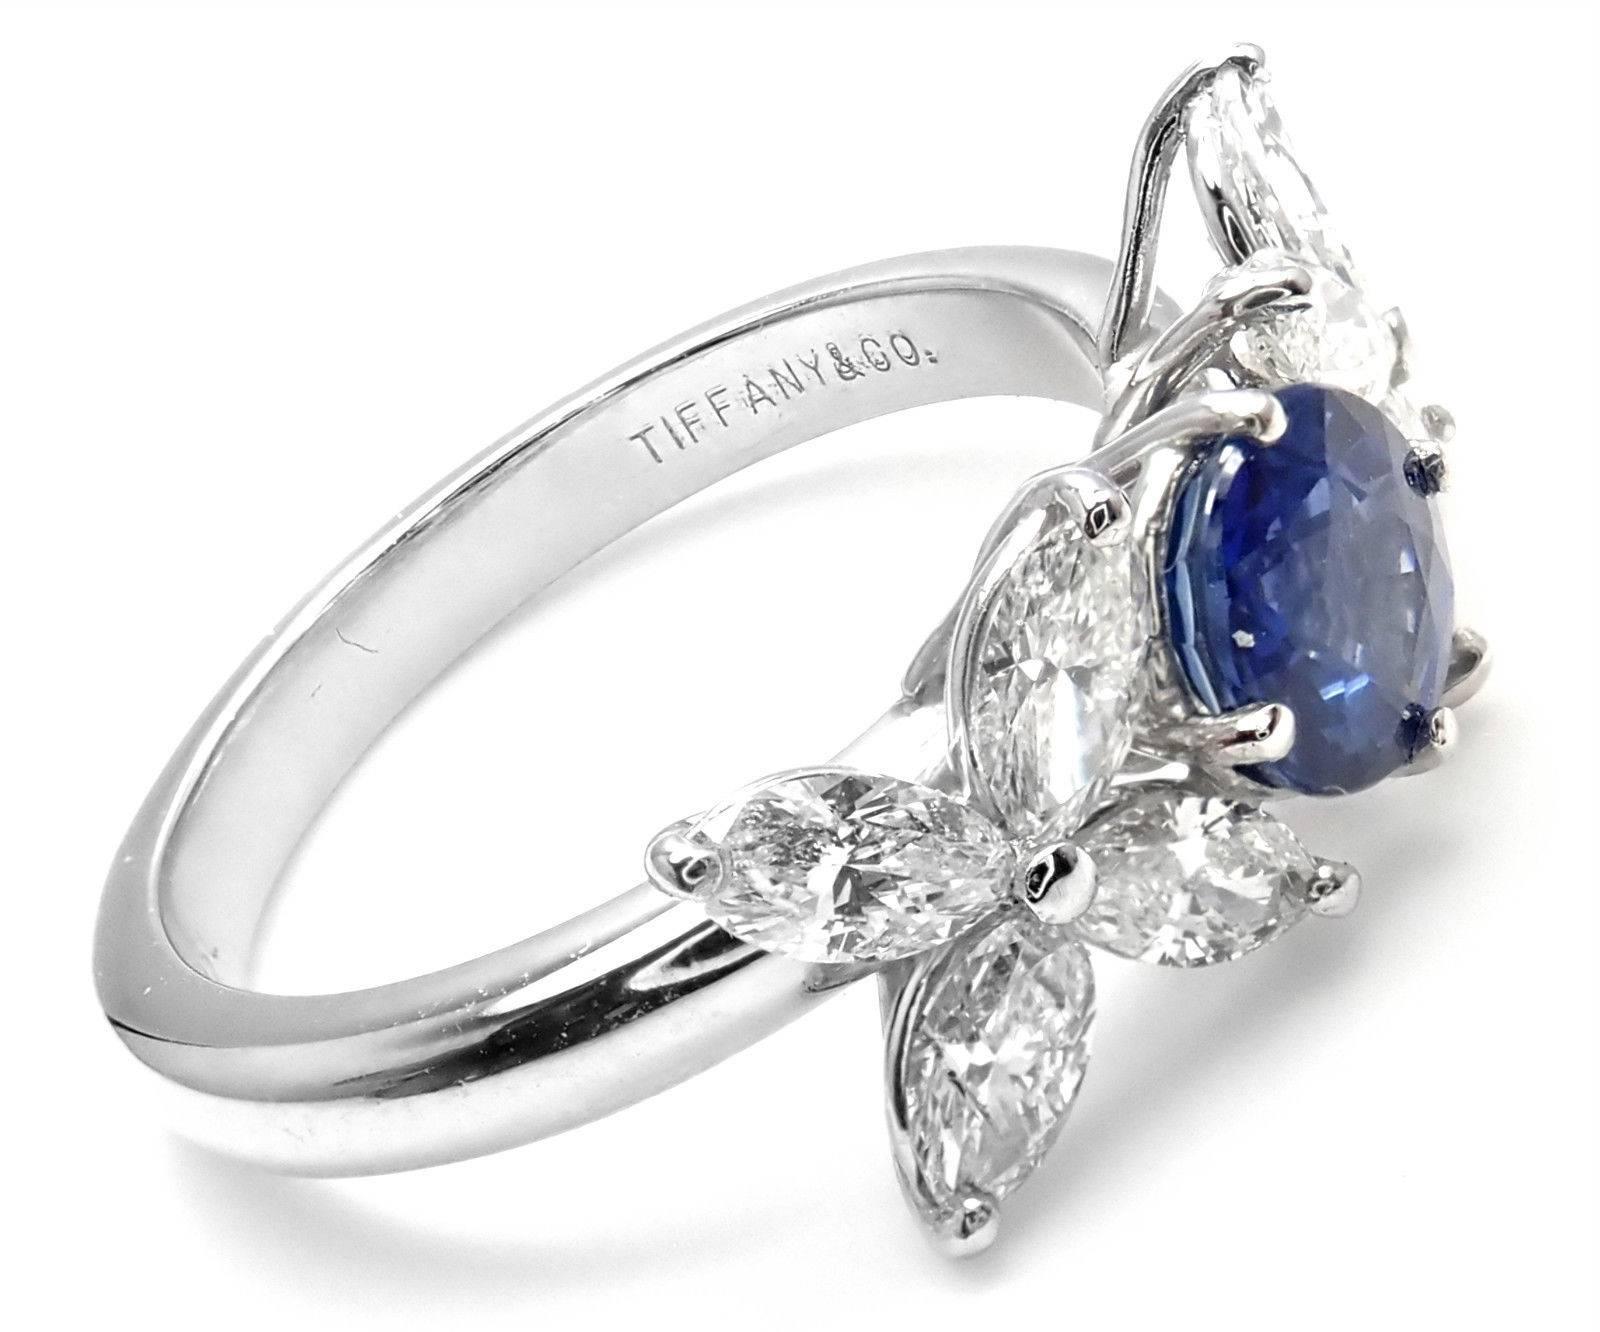 Platinum Diamond Sapphire Victoria Ring by Tiffany & Co. 
With 8 marque shape diamonds VS1 clarity G color
total weight approx. .50ct
1 round sapphire 5mm 
Details: 
Weight: 6.2 grams
Width: 8mm
Ring Size: 5 3/4 (resize available and free of